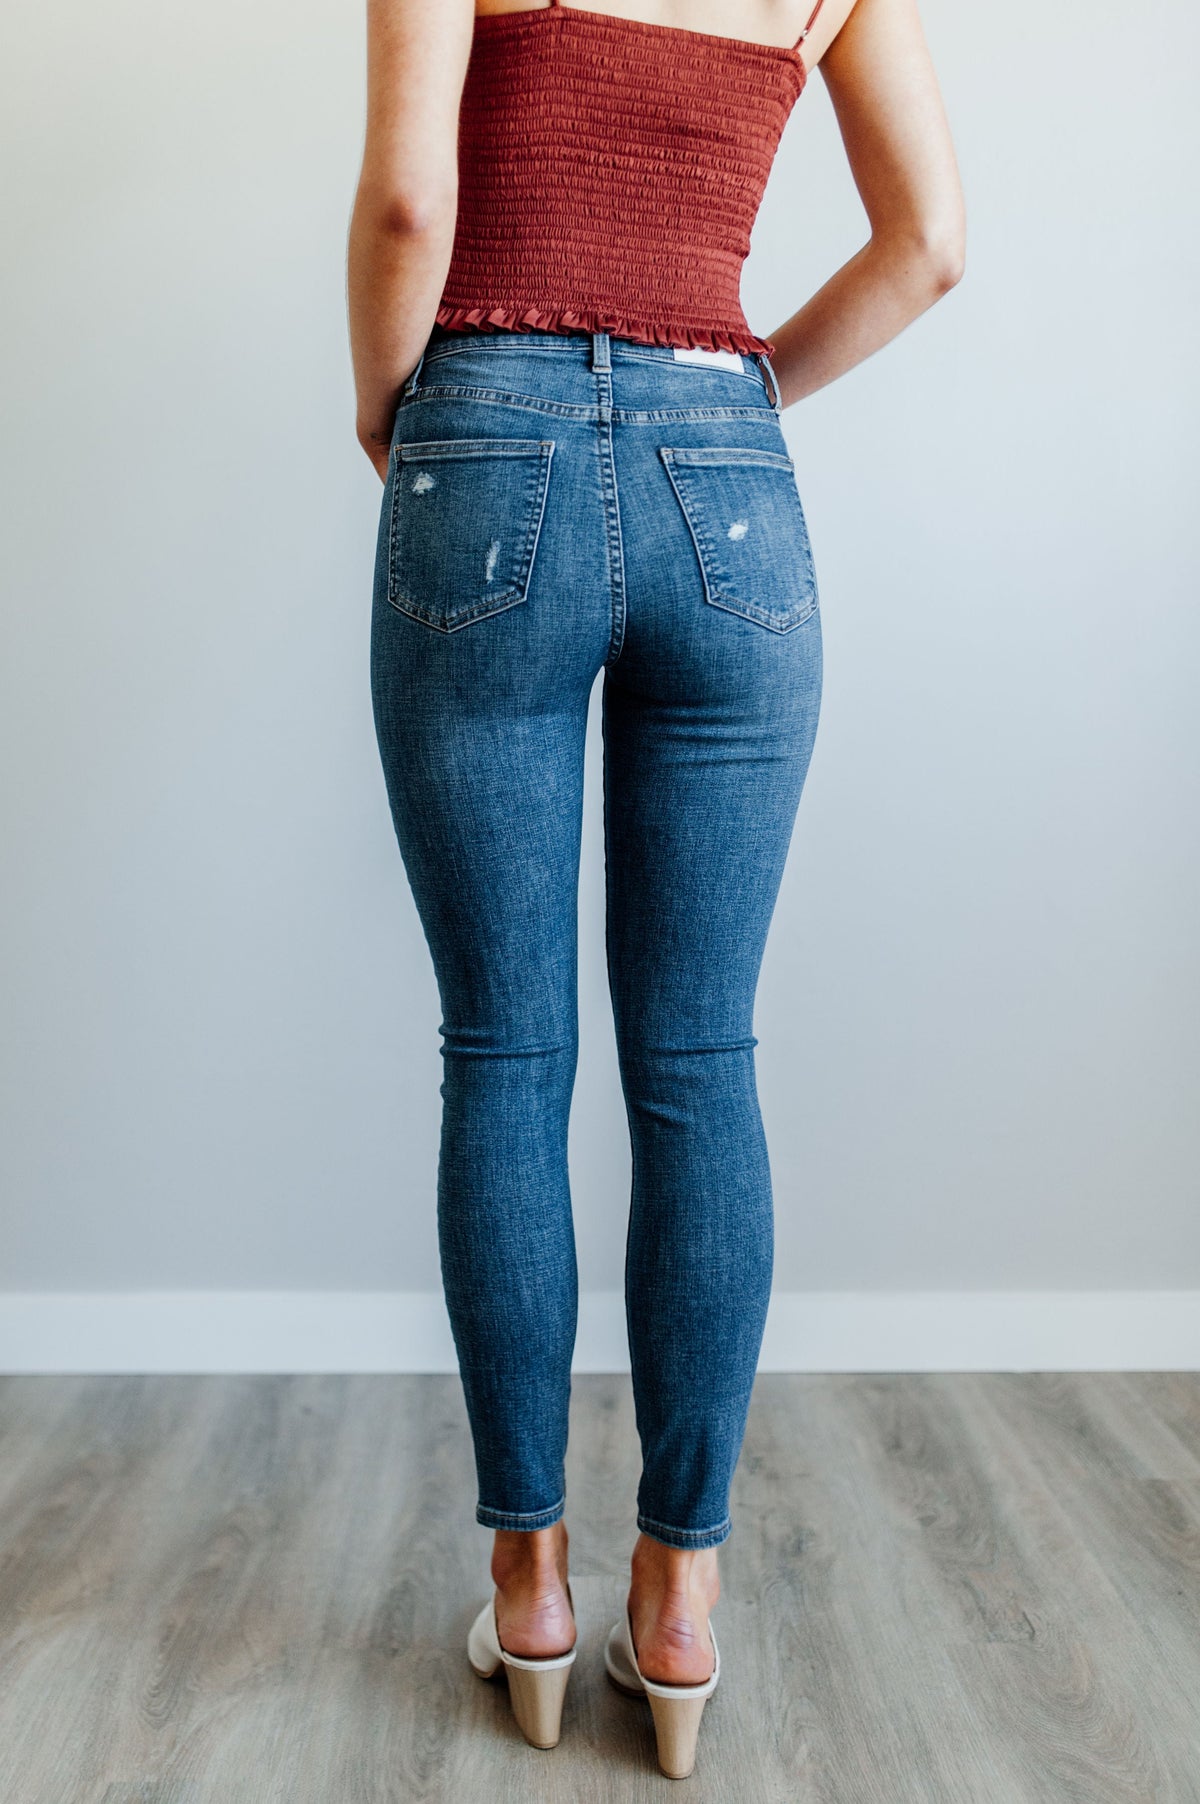 Pictured is a mid-wash, distressed denim jean with a high-rise waist, cropped ankles, and lightly distressed denim material.